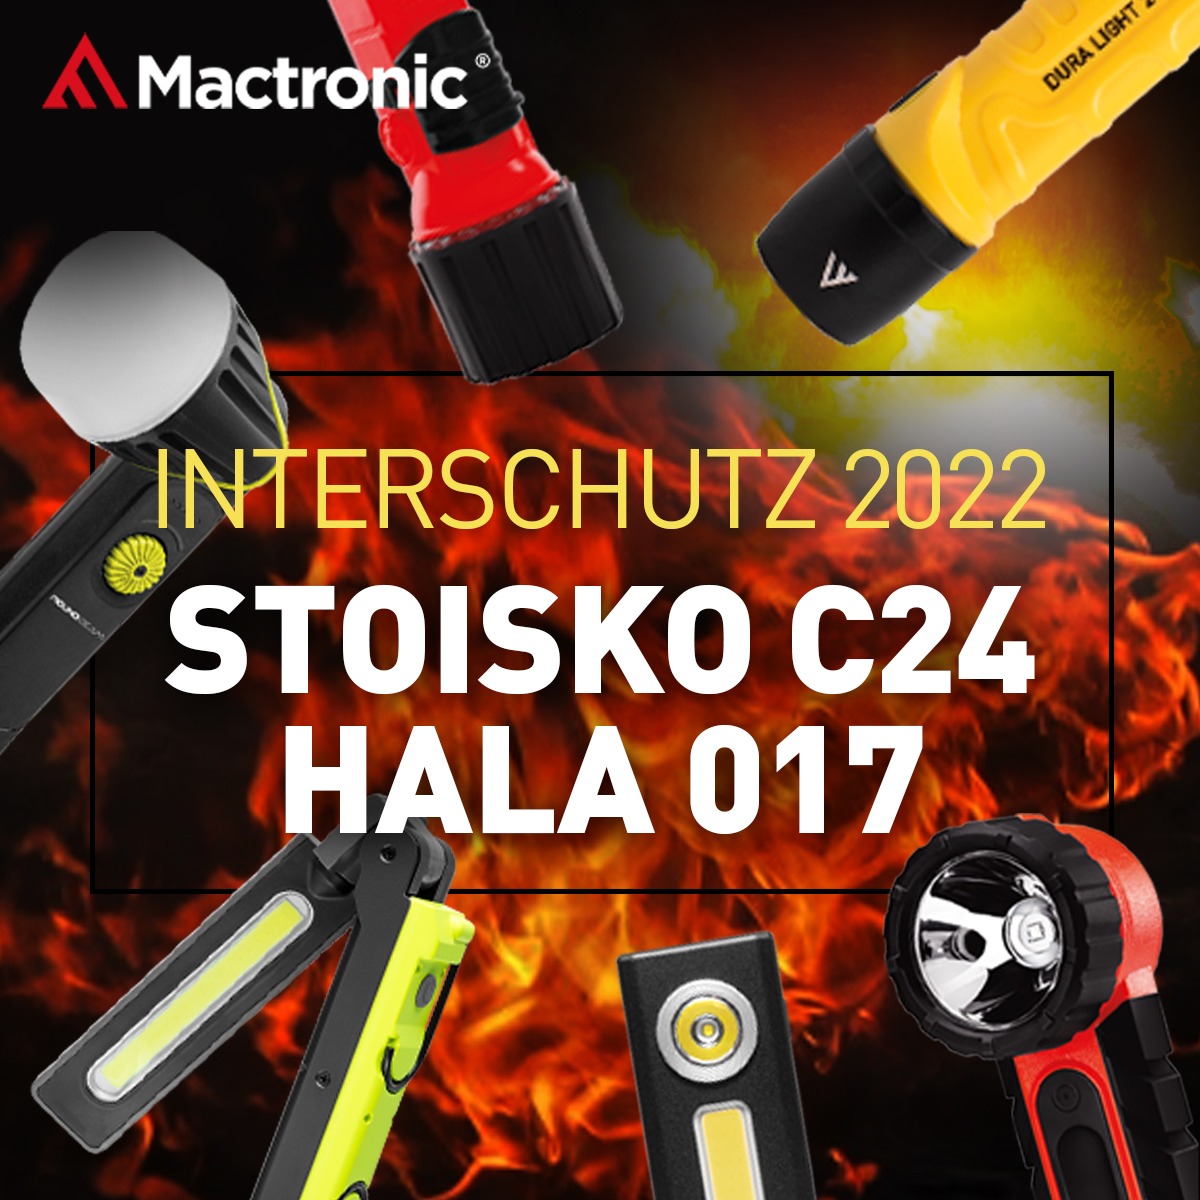 Intershutz trade fair is the largest firefighting trade fair in the world, and we couldn’t miss it!